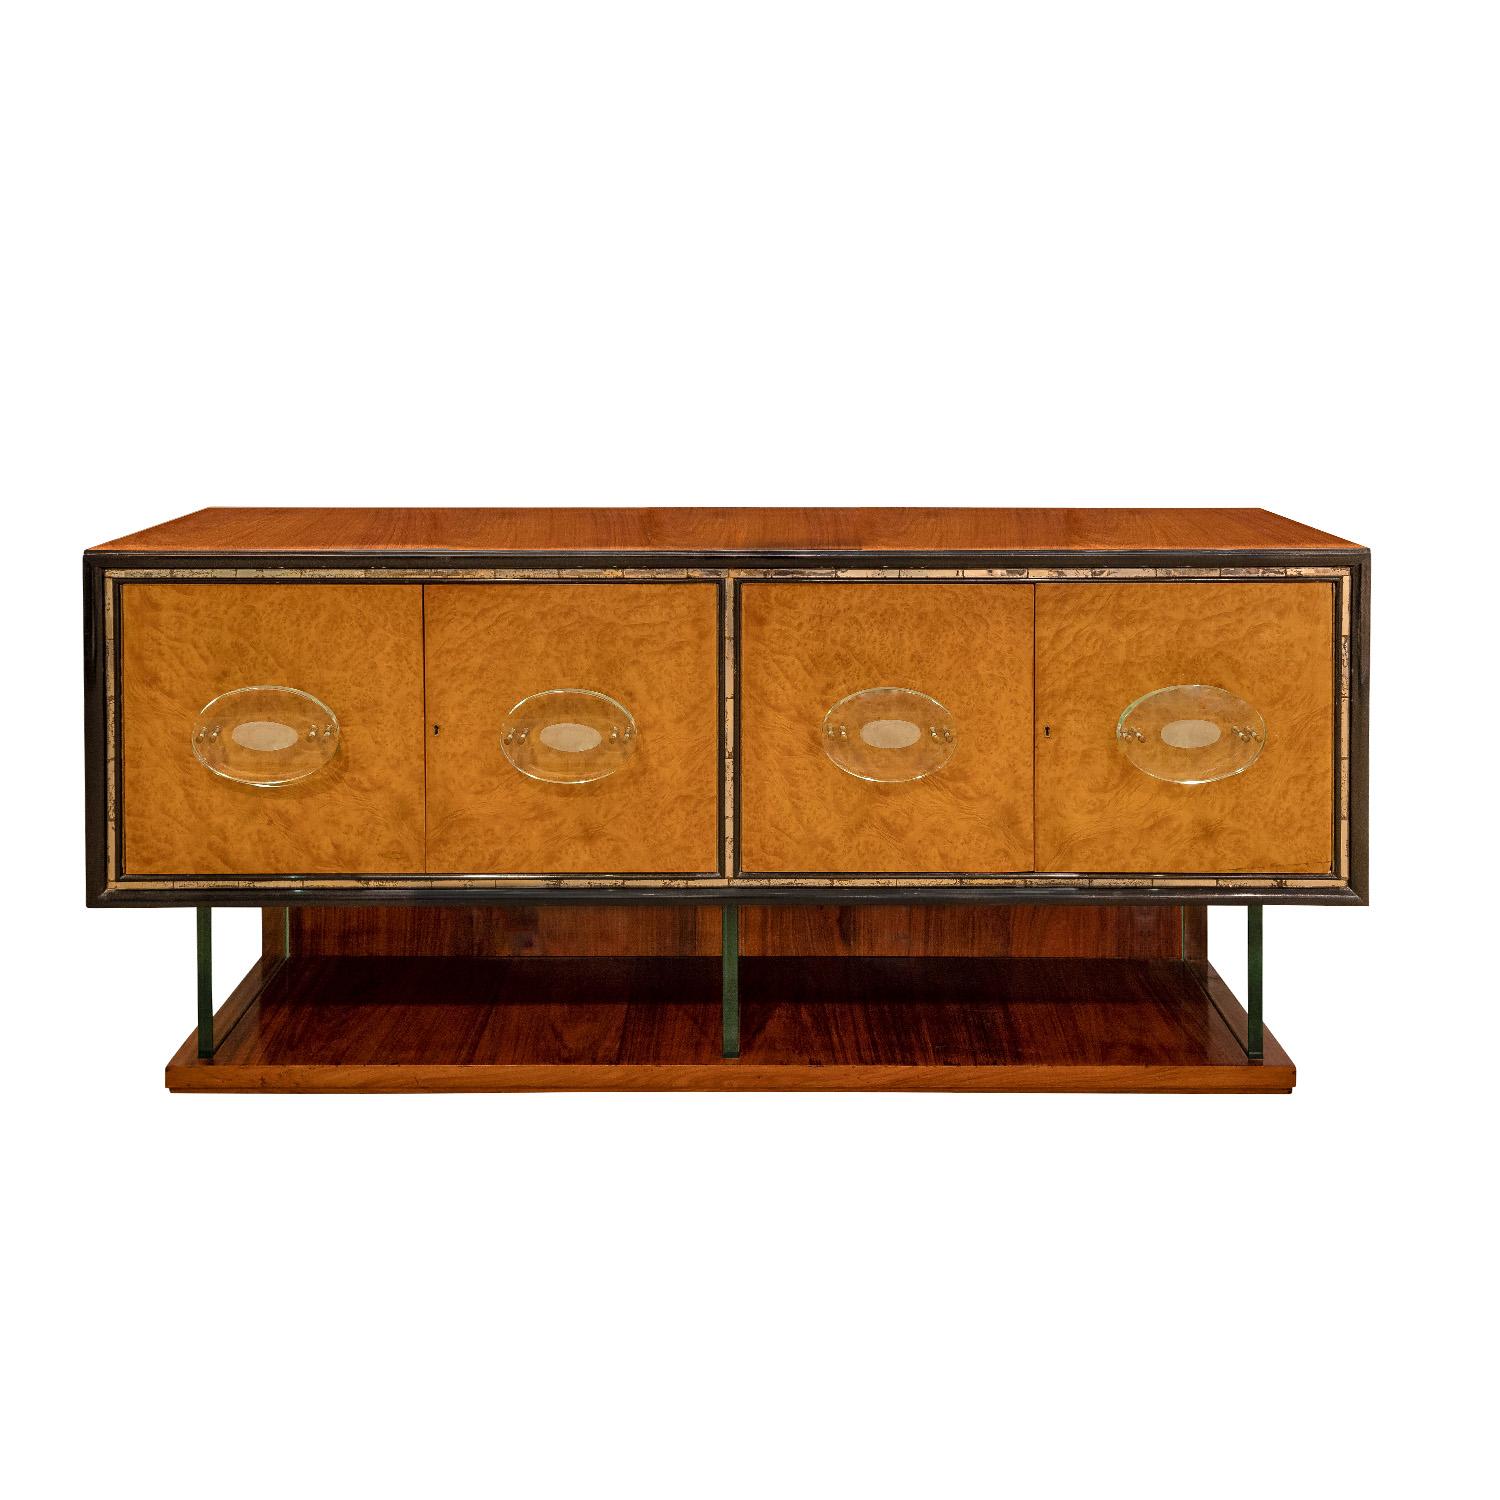 Beautifully crafted credenza in Italian walnut with vertical glass slab supports and glass handles by Fontana Arte on the bookmatched burl doors with brass accents, Italian 1950s. There is antique mirror trim around the doors. This piece is